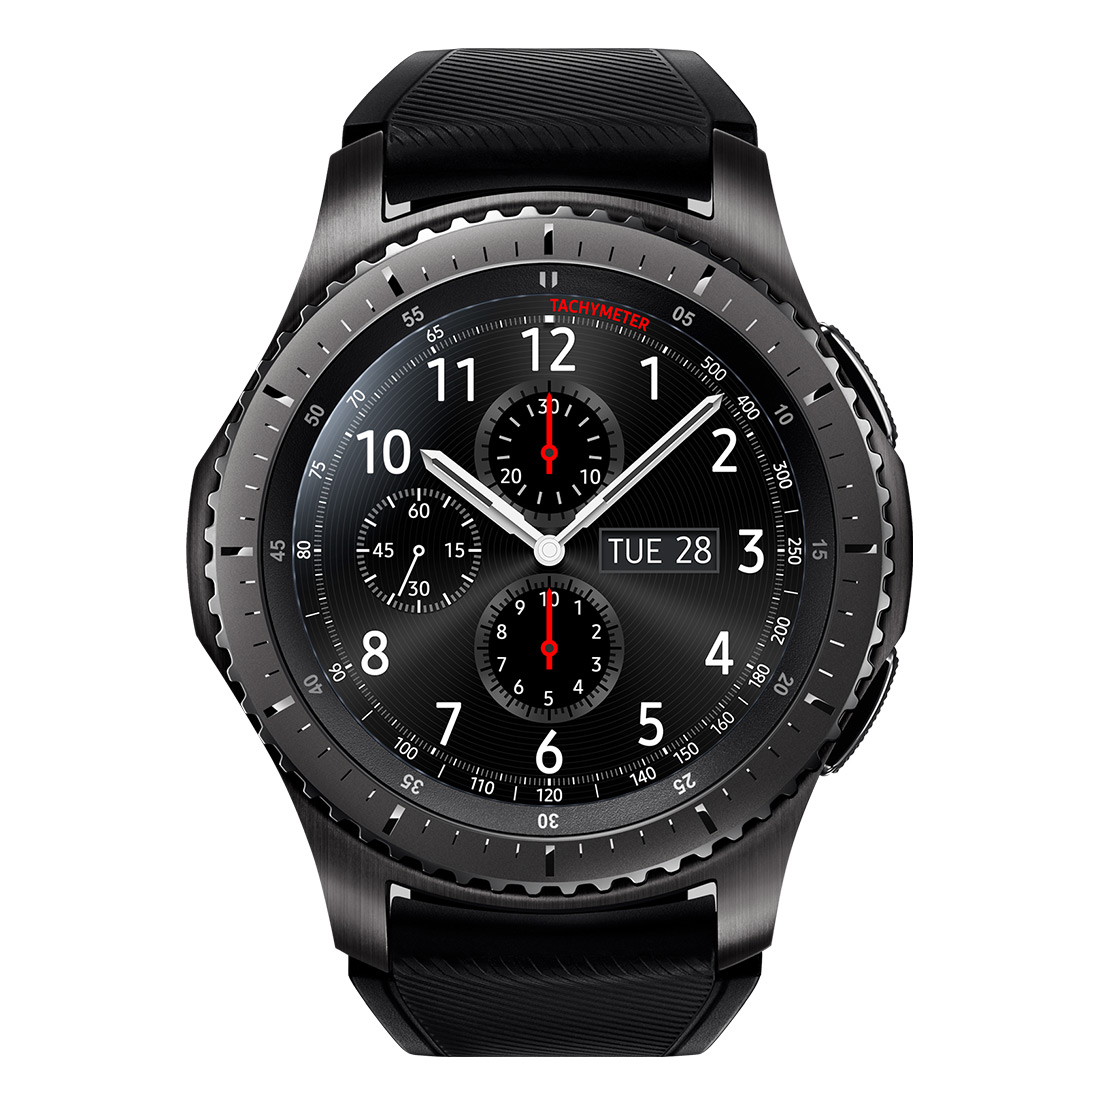 Samsung Announces the Gear S3 Classic and Gear S3 Frontier | Droid Life